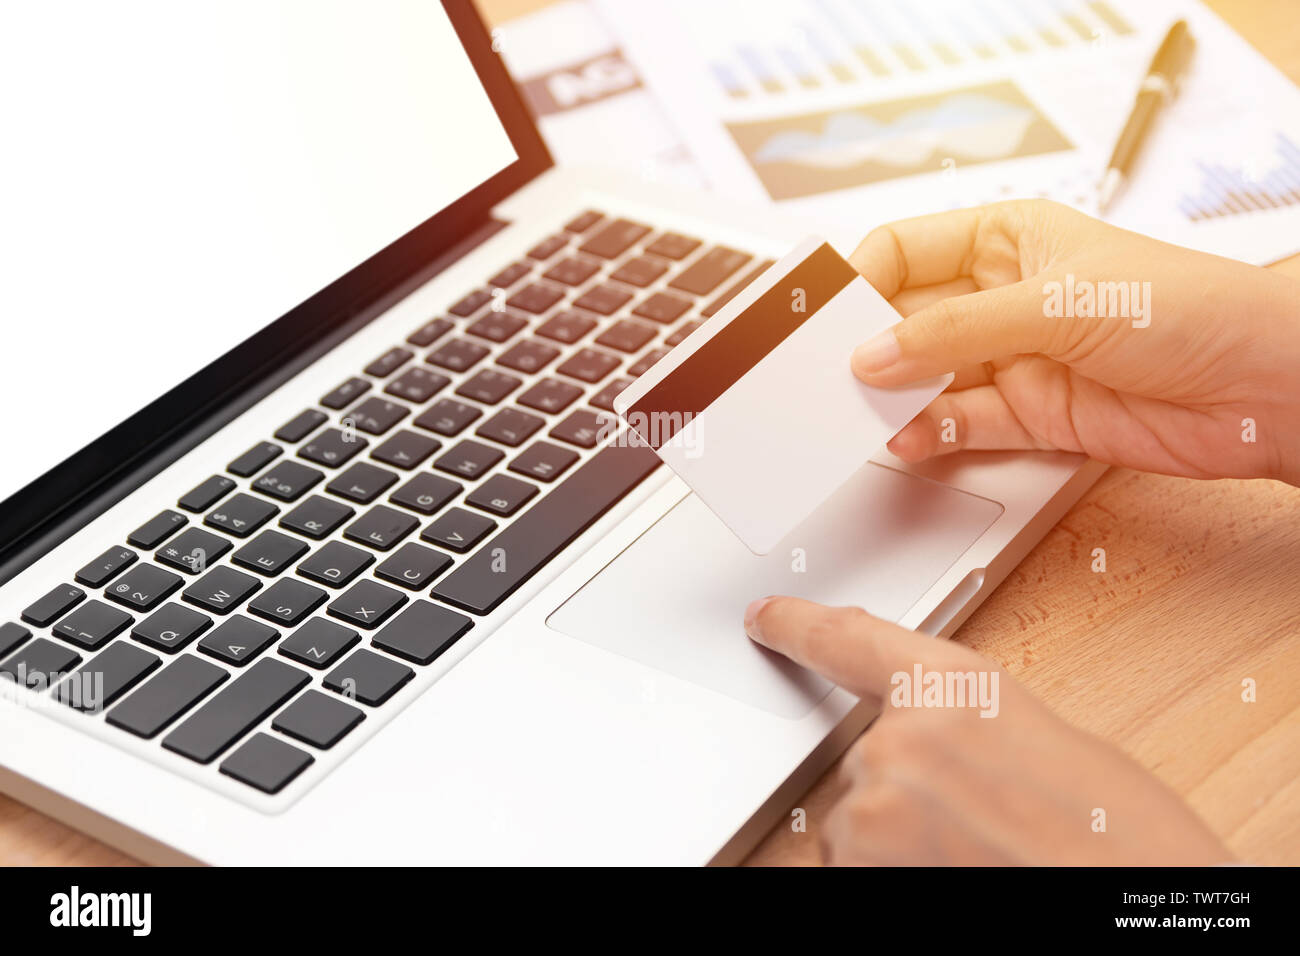 e-commerce and shopping online concept. woman holding a credit card and purchase making online payment via computer notebook with blank white screen i Stock Photo